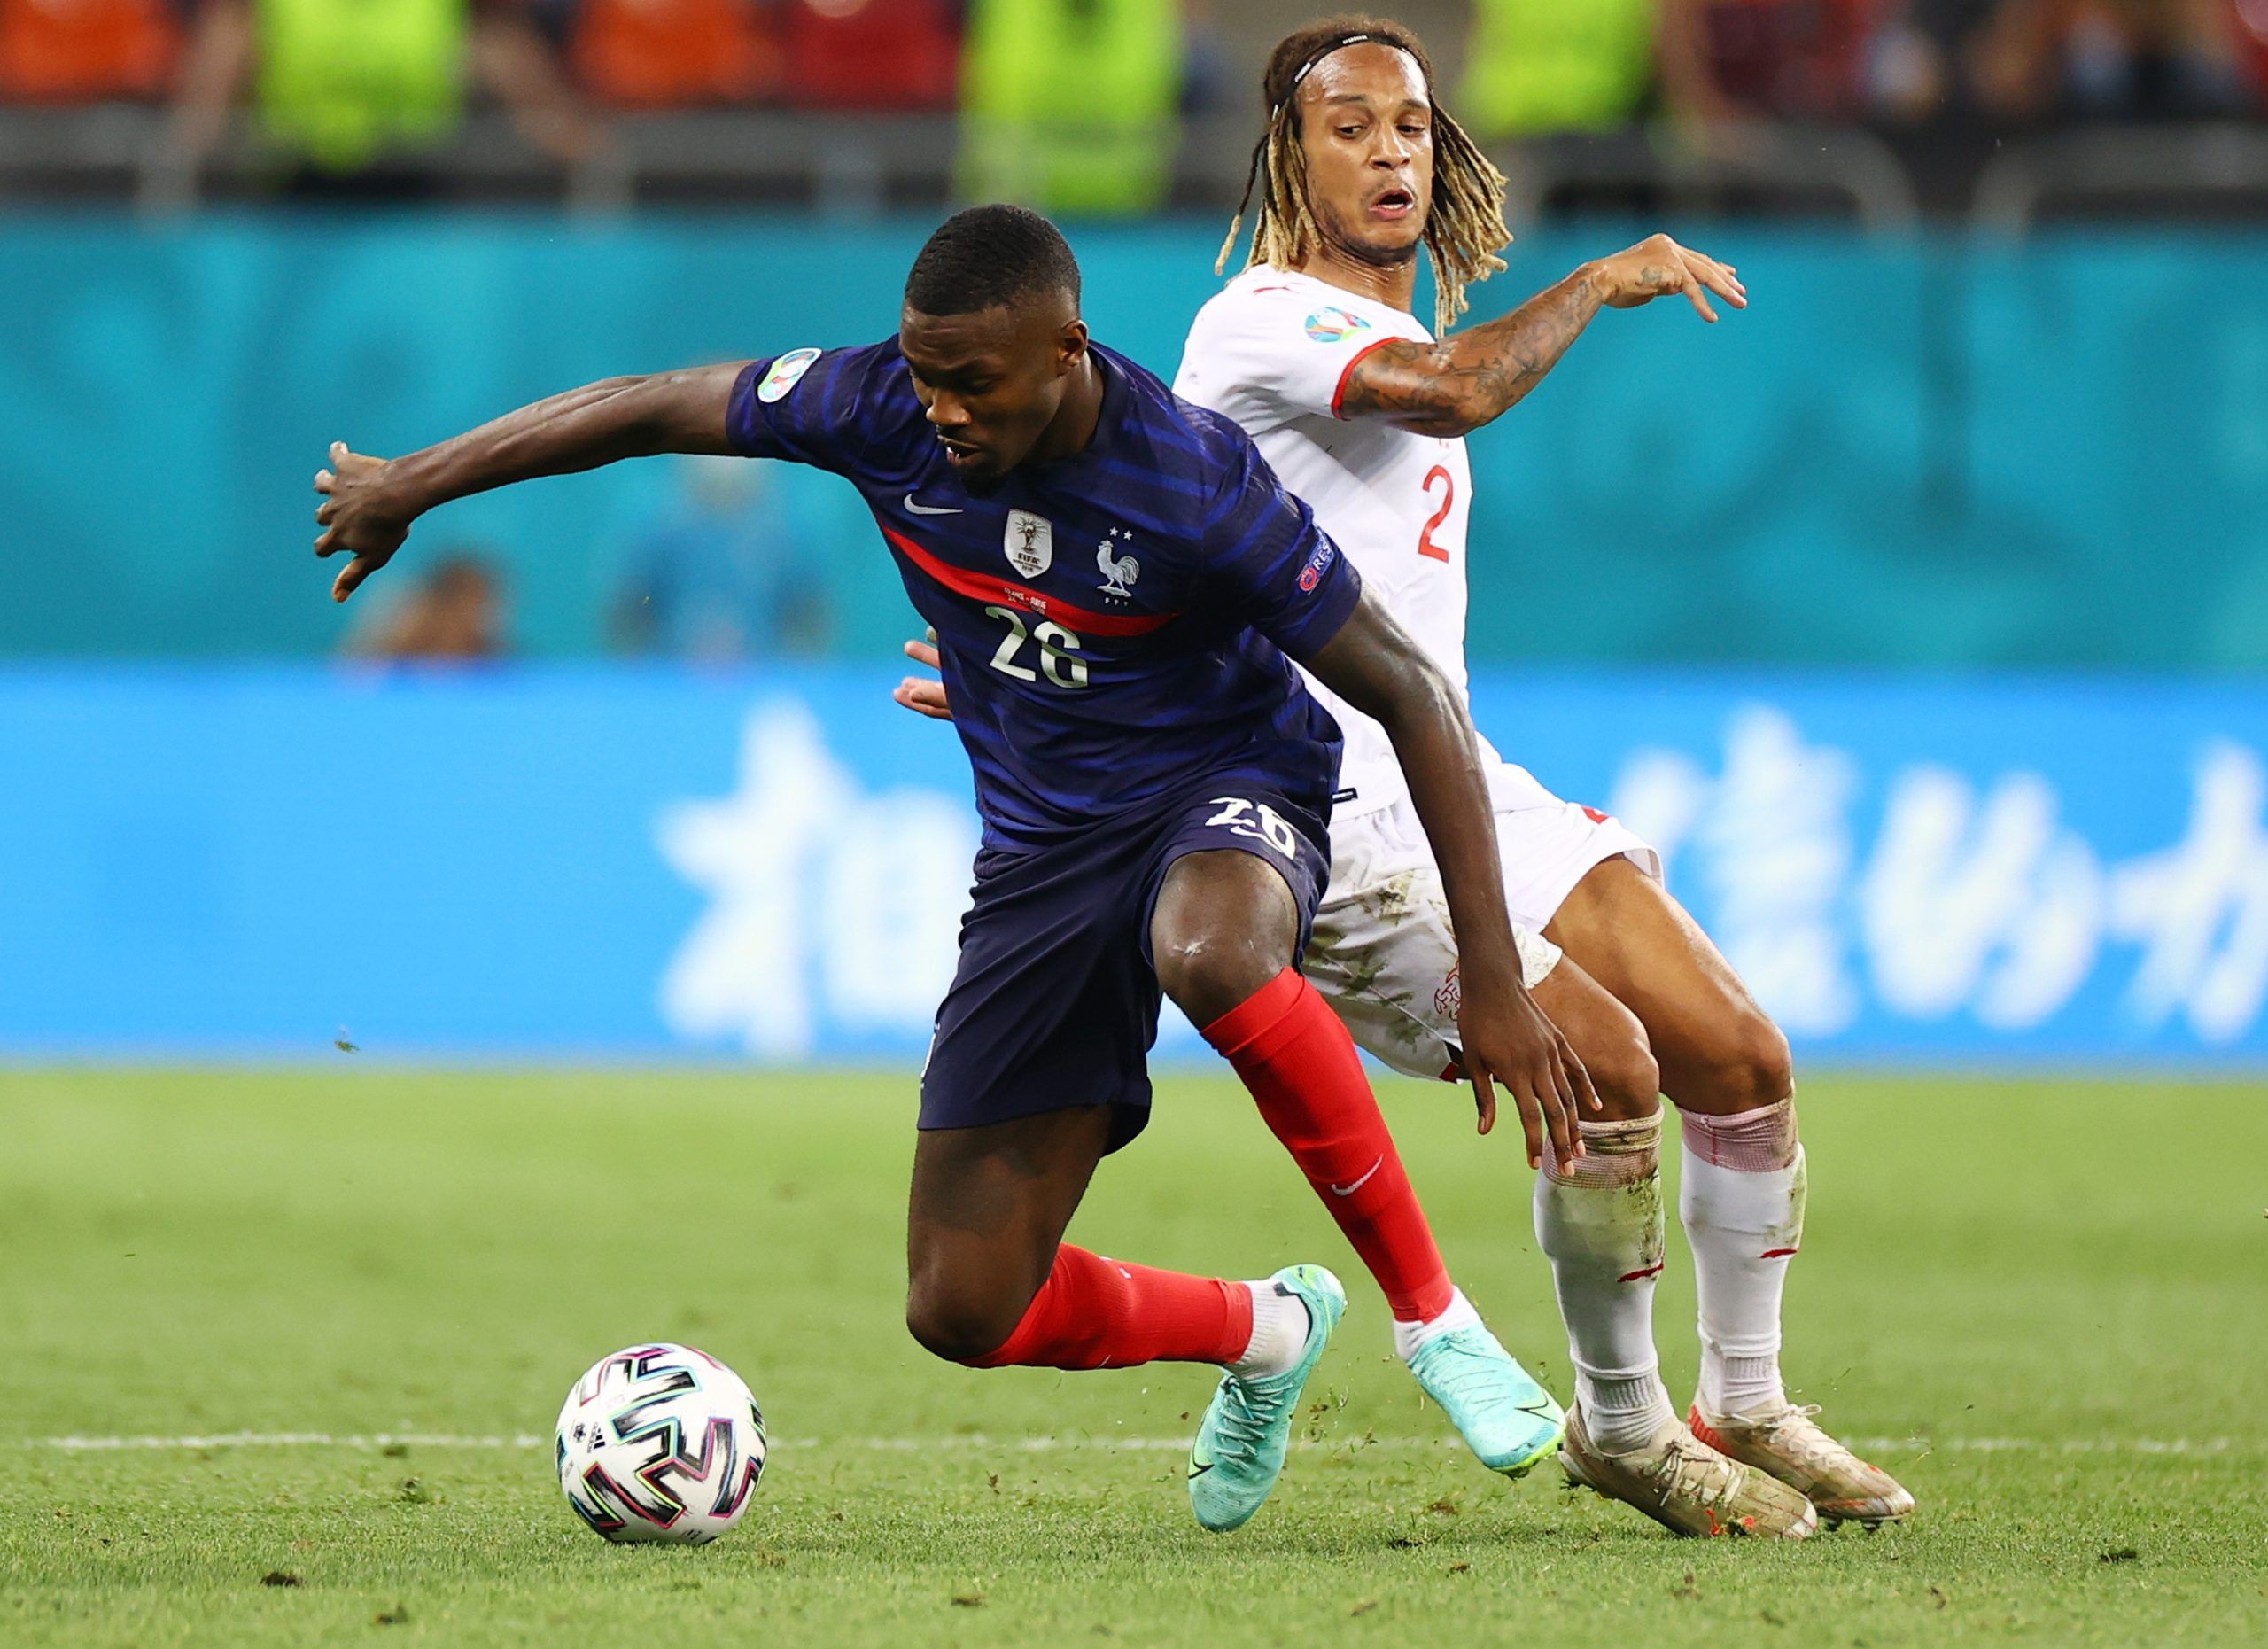 Soccer Football - Euro 2020 - Round of 16 - France v Switzerland - National Arena Bucharest, Bucharest, Romania - June 29, 2021   France's Marcus Thuram in action with Switzerland's Kevin Mbabu Pool via REUTERS/Marko Djurica